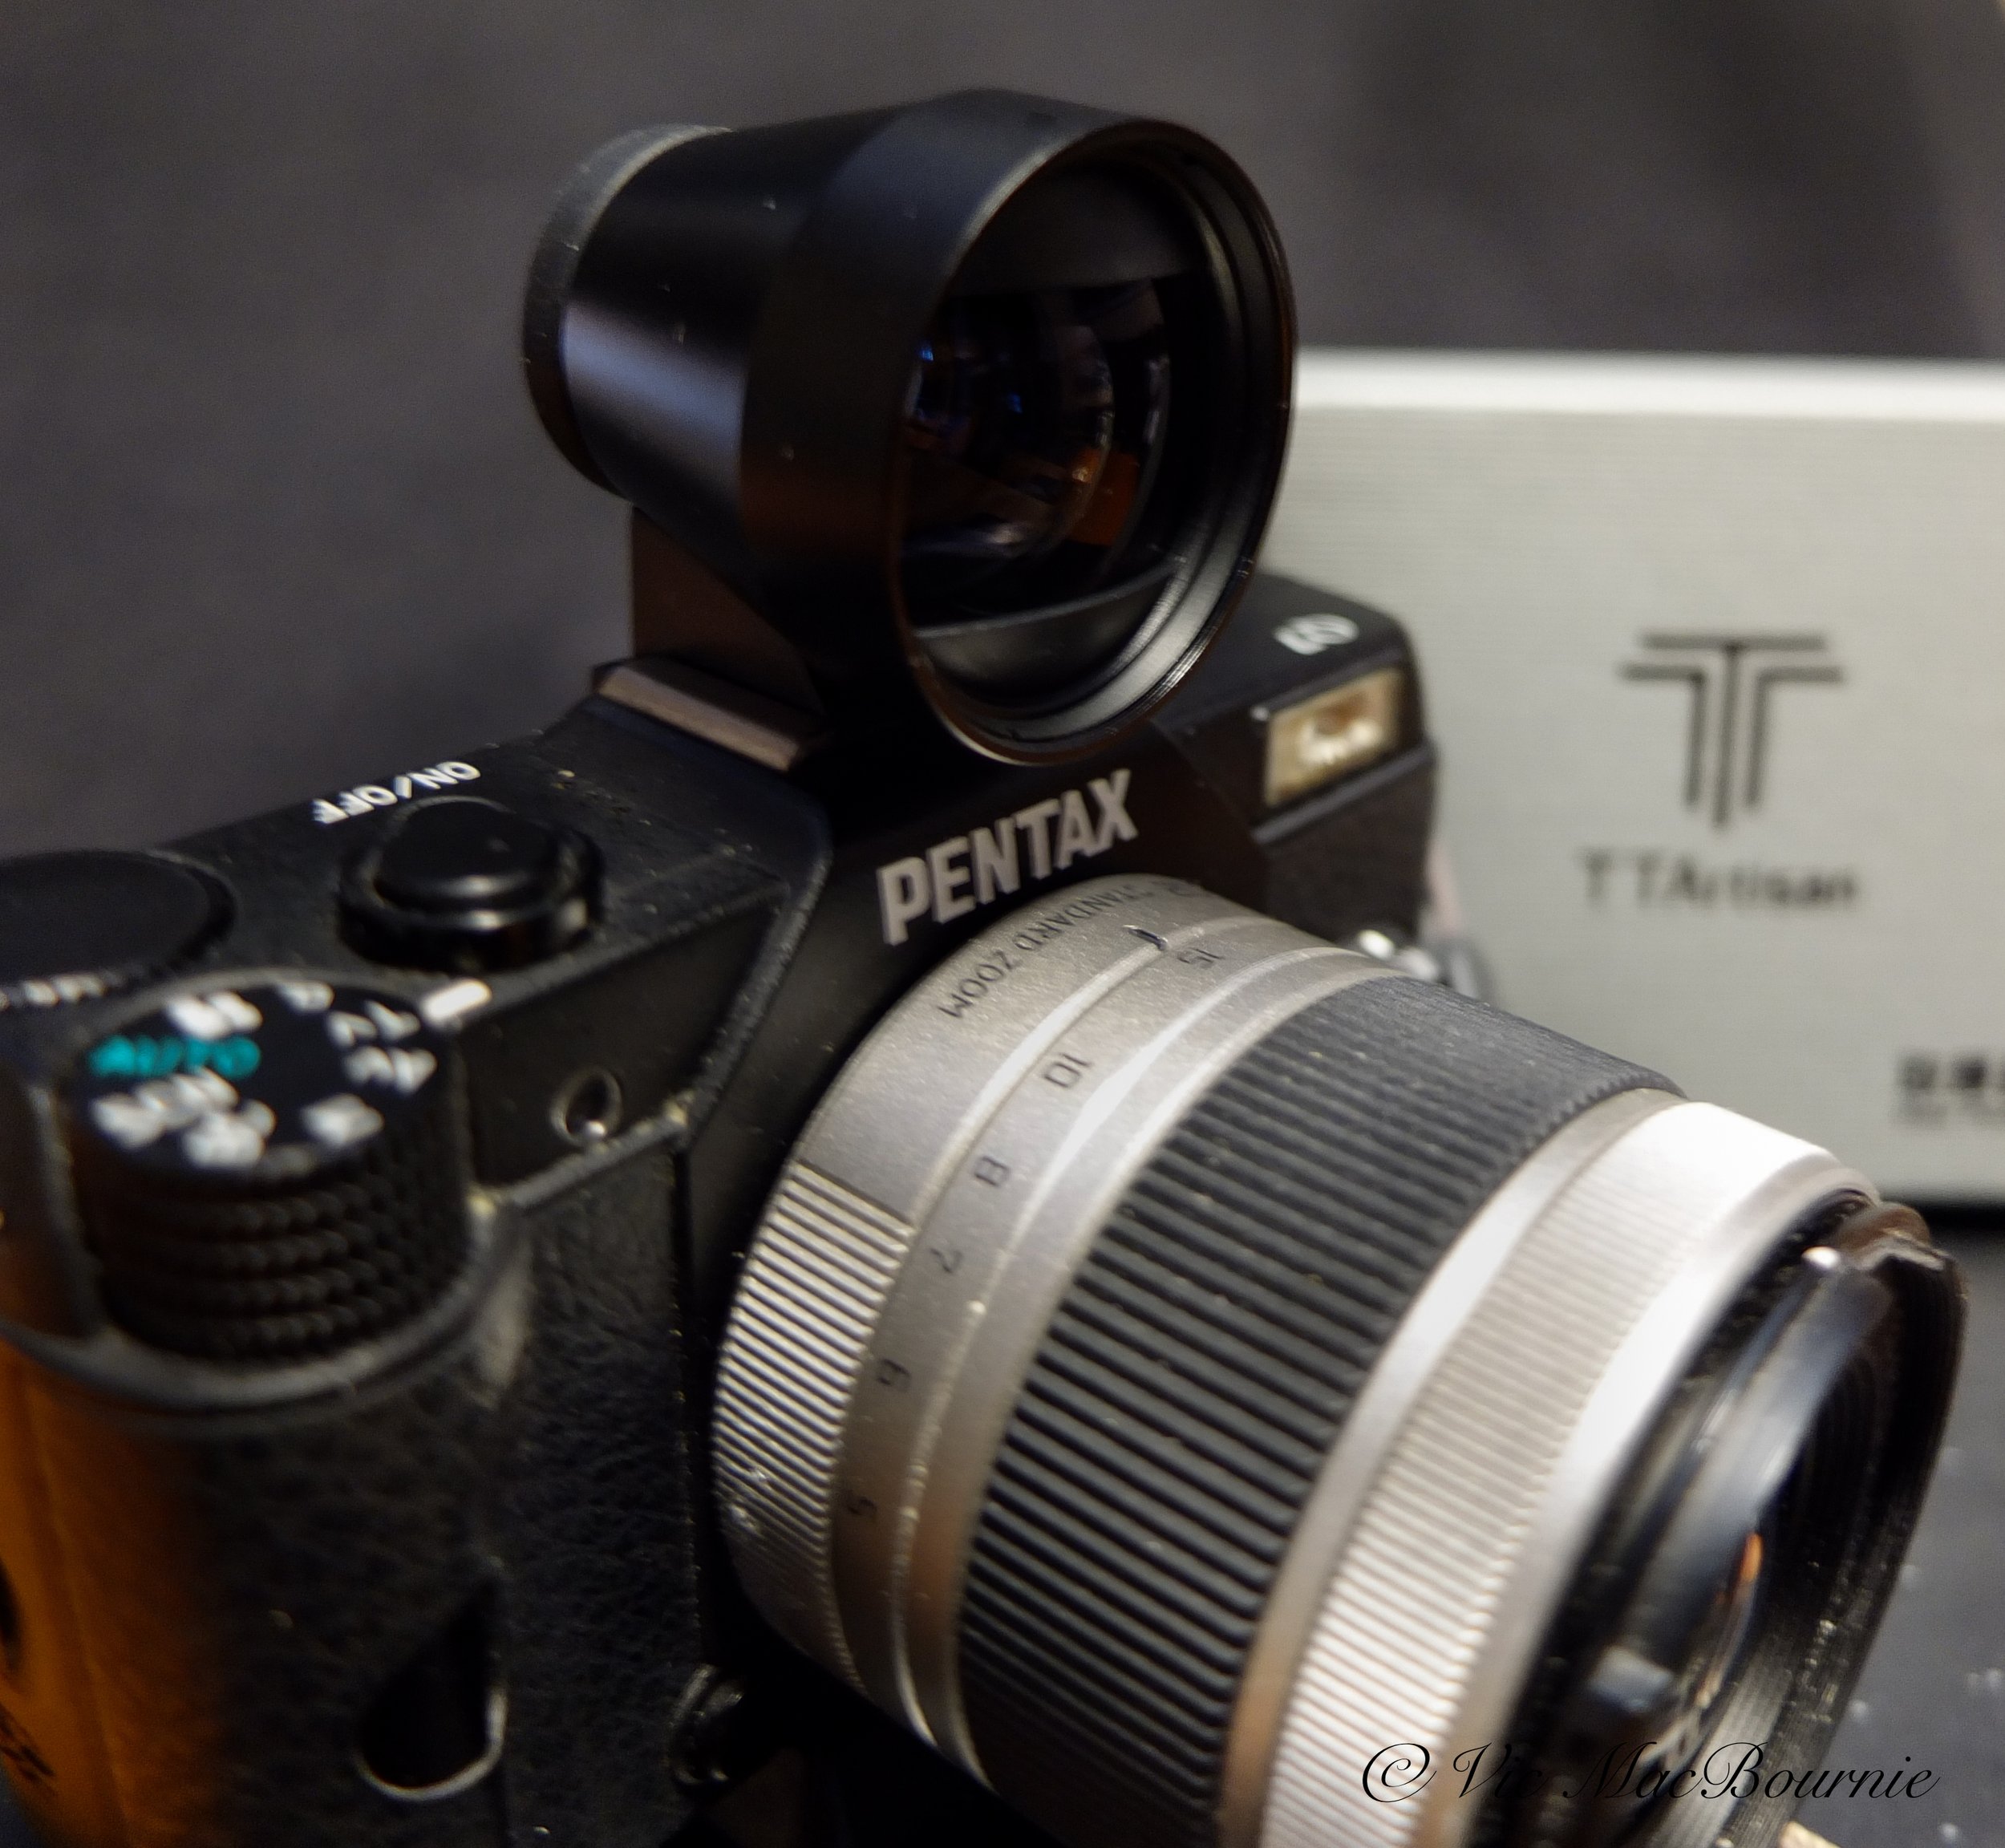 Pentax Q combined with the 28mm TTArtisan optical viewfinder is an exquisite combination.